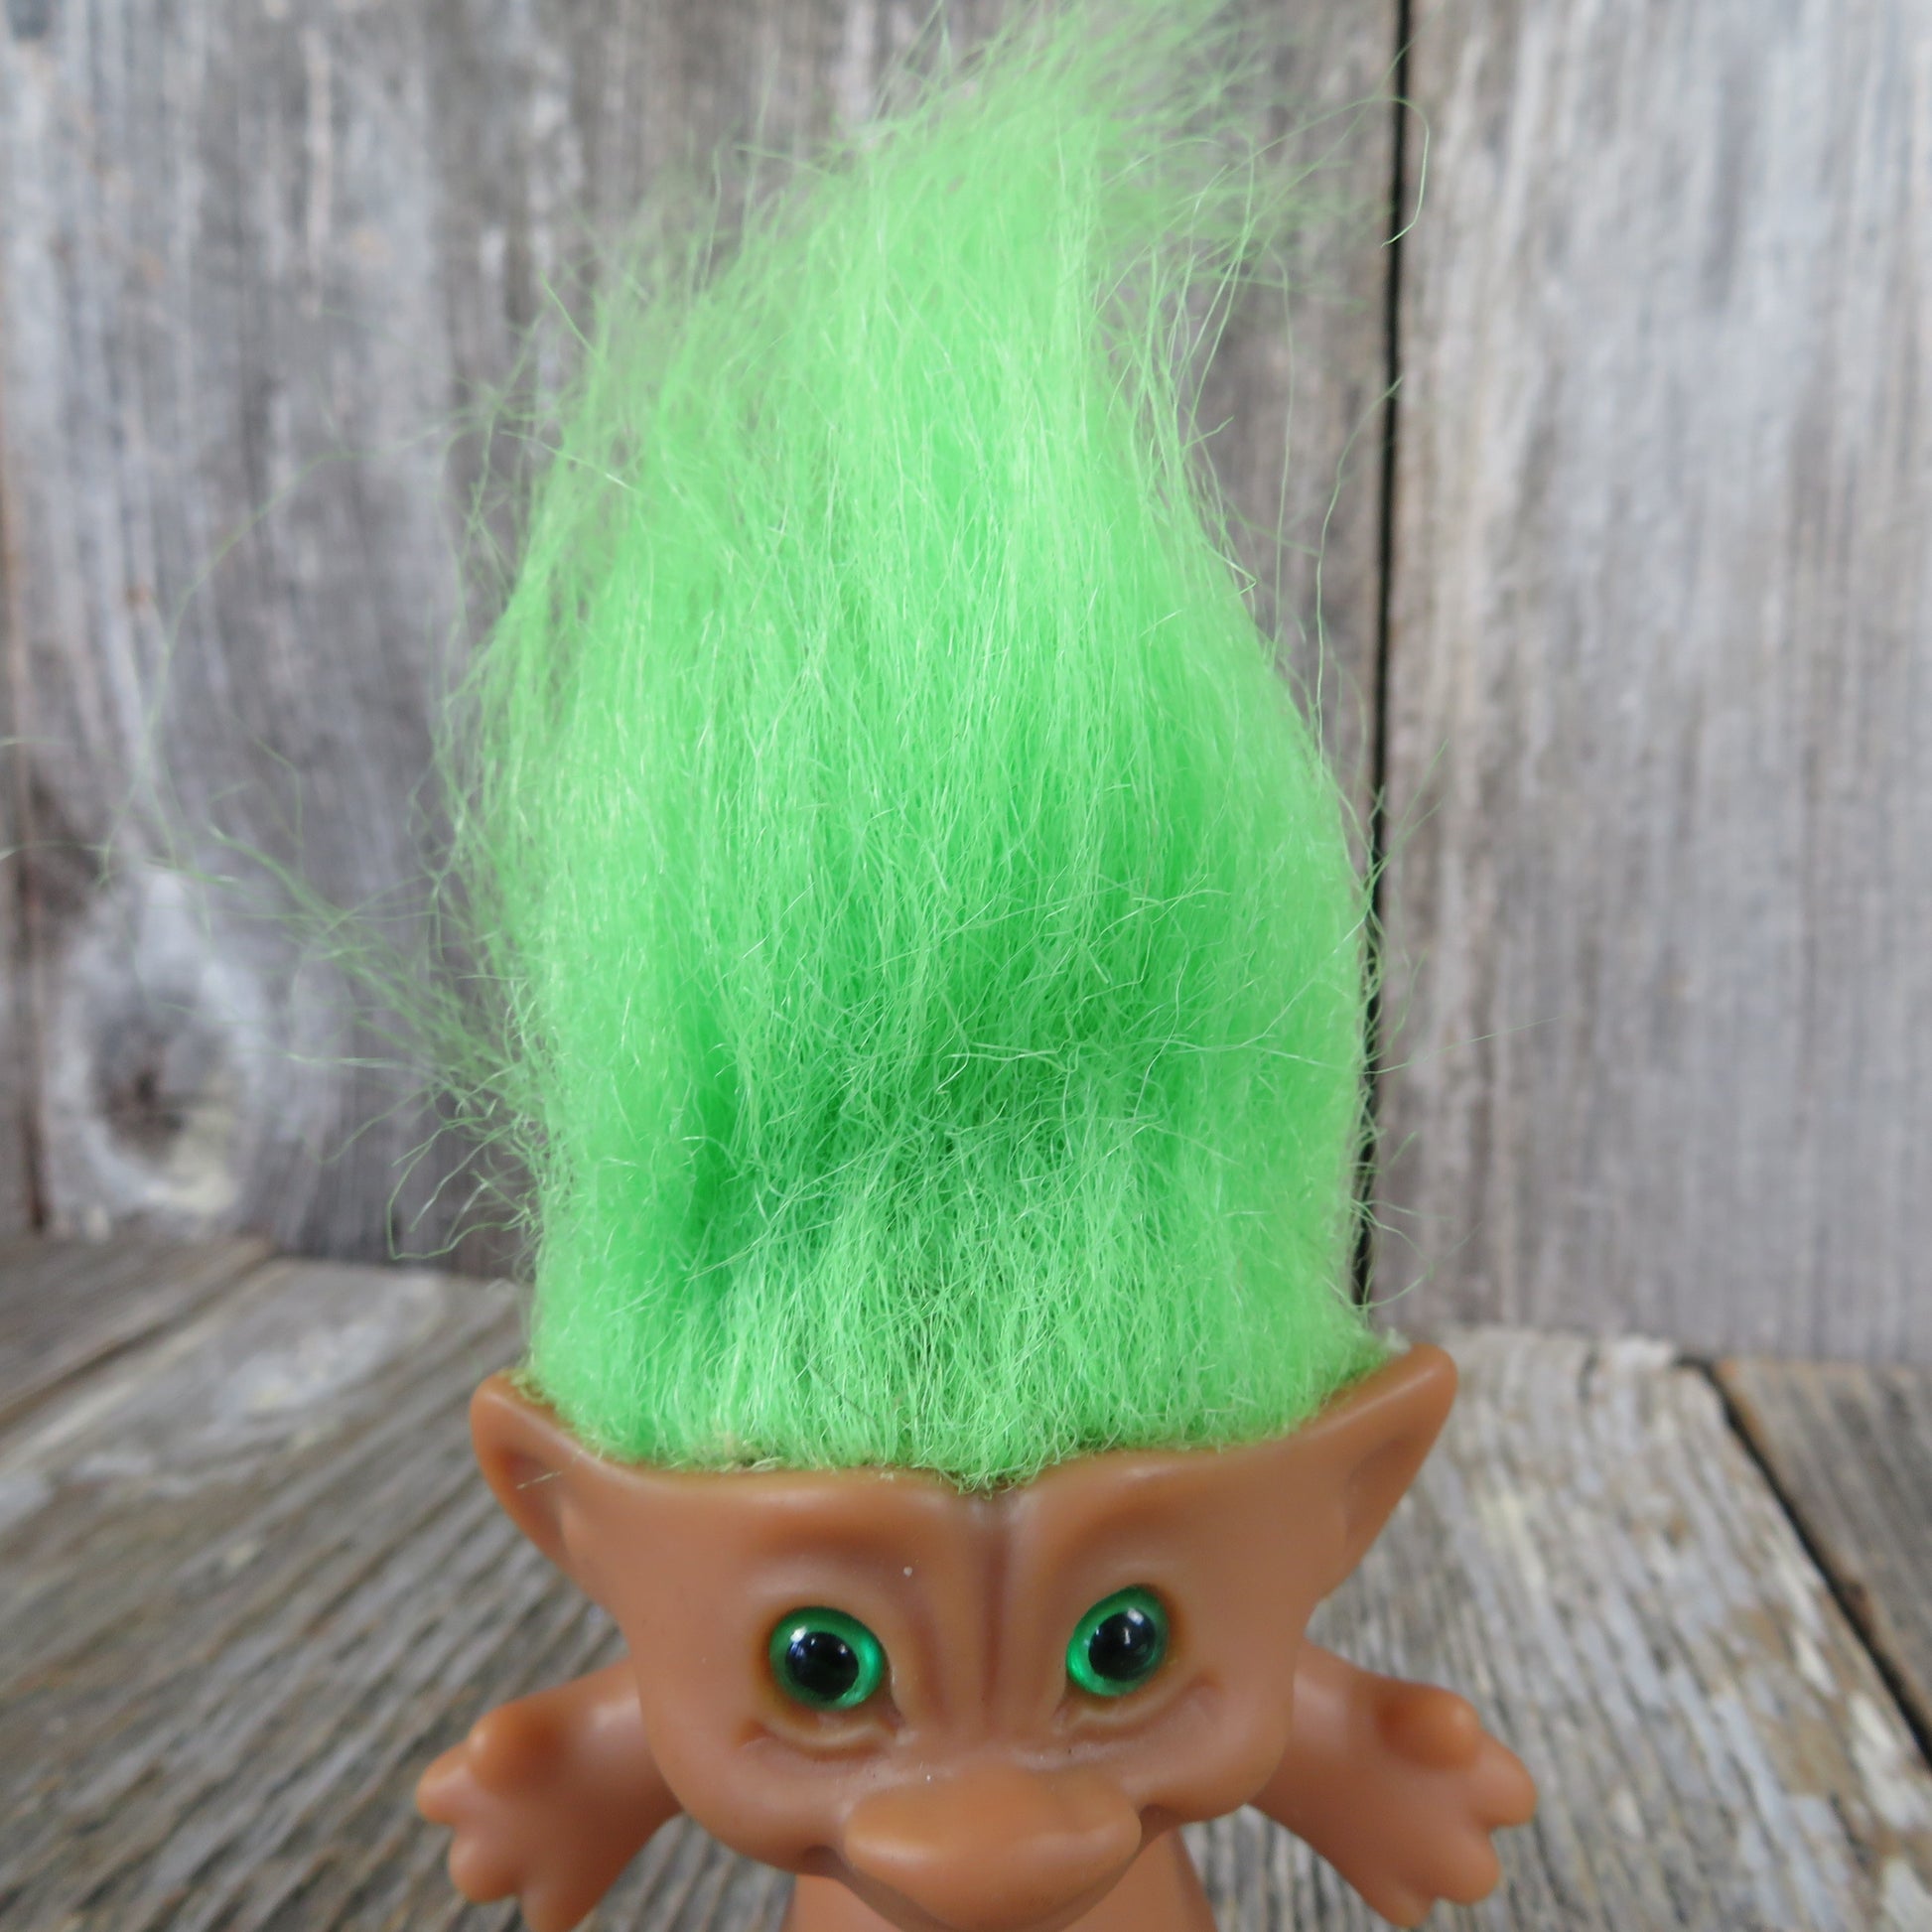 Vintage Troll Doll Green Heart Jewel Belly Button Ace Novelty Lime Green - At Grandma's Table